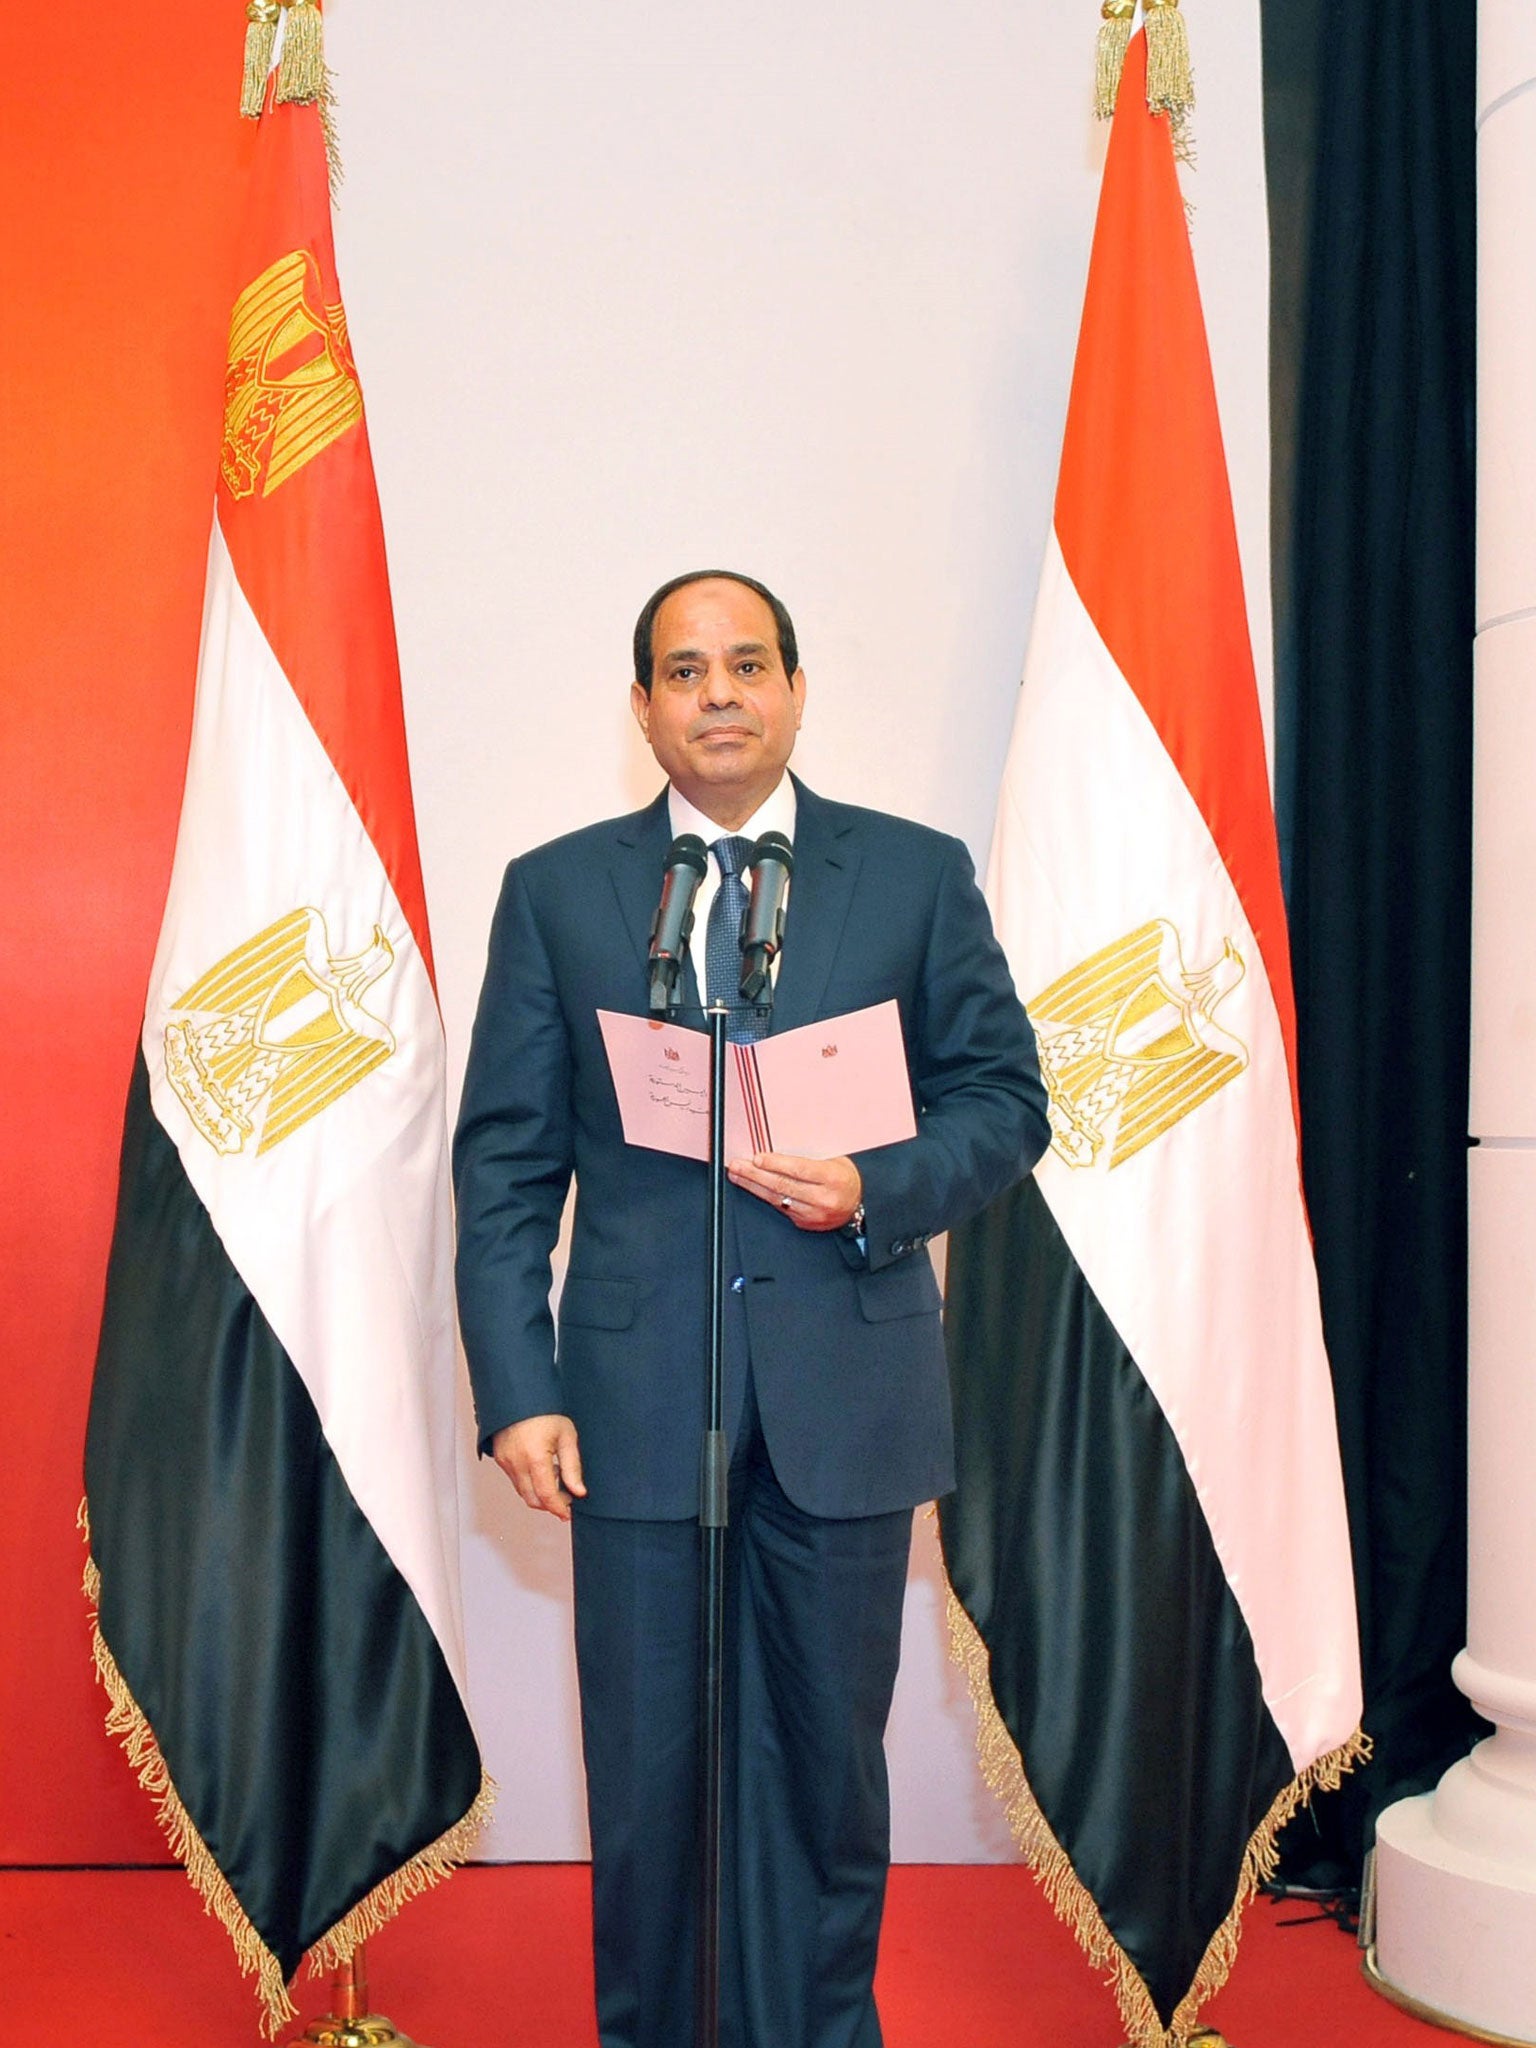 Abdel Fattah al-Sisi, the former head of Egypt’s armed forces, has been sworn in as President